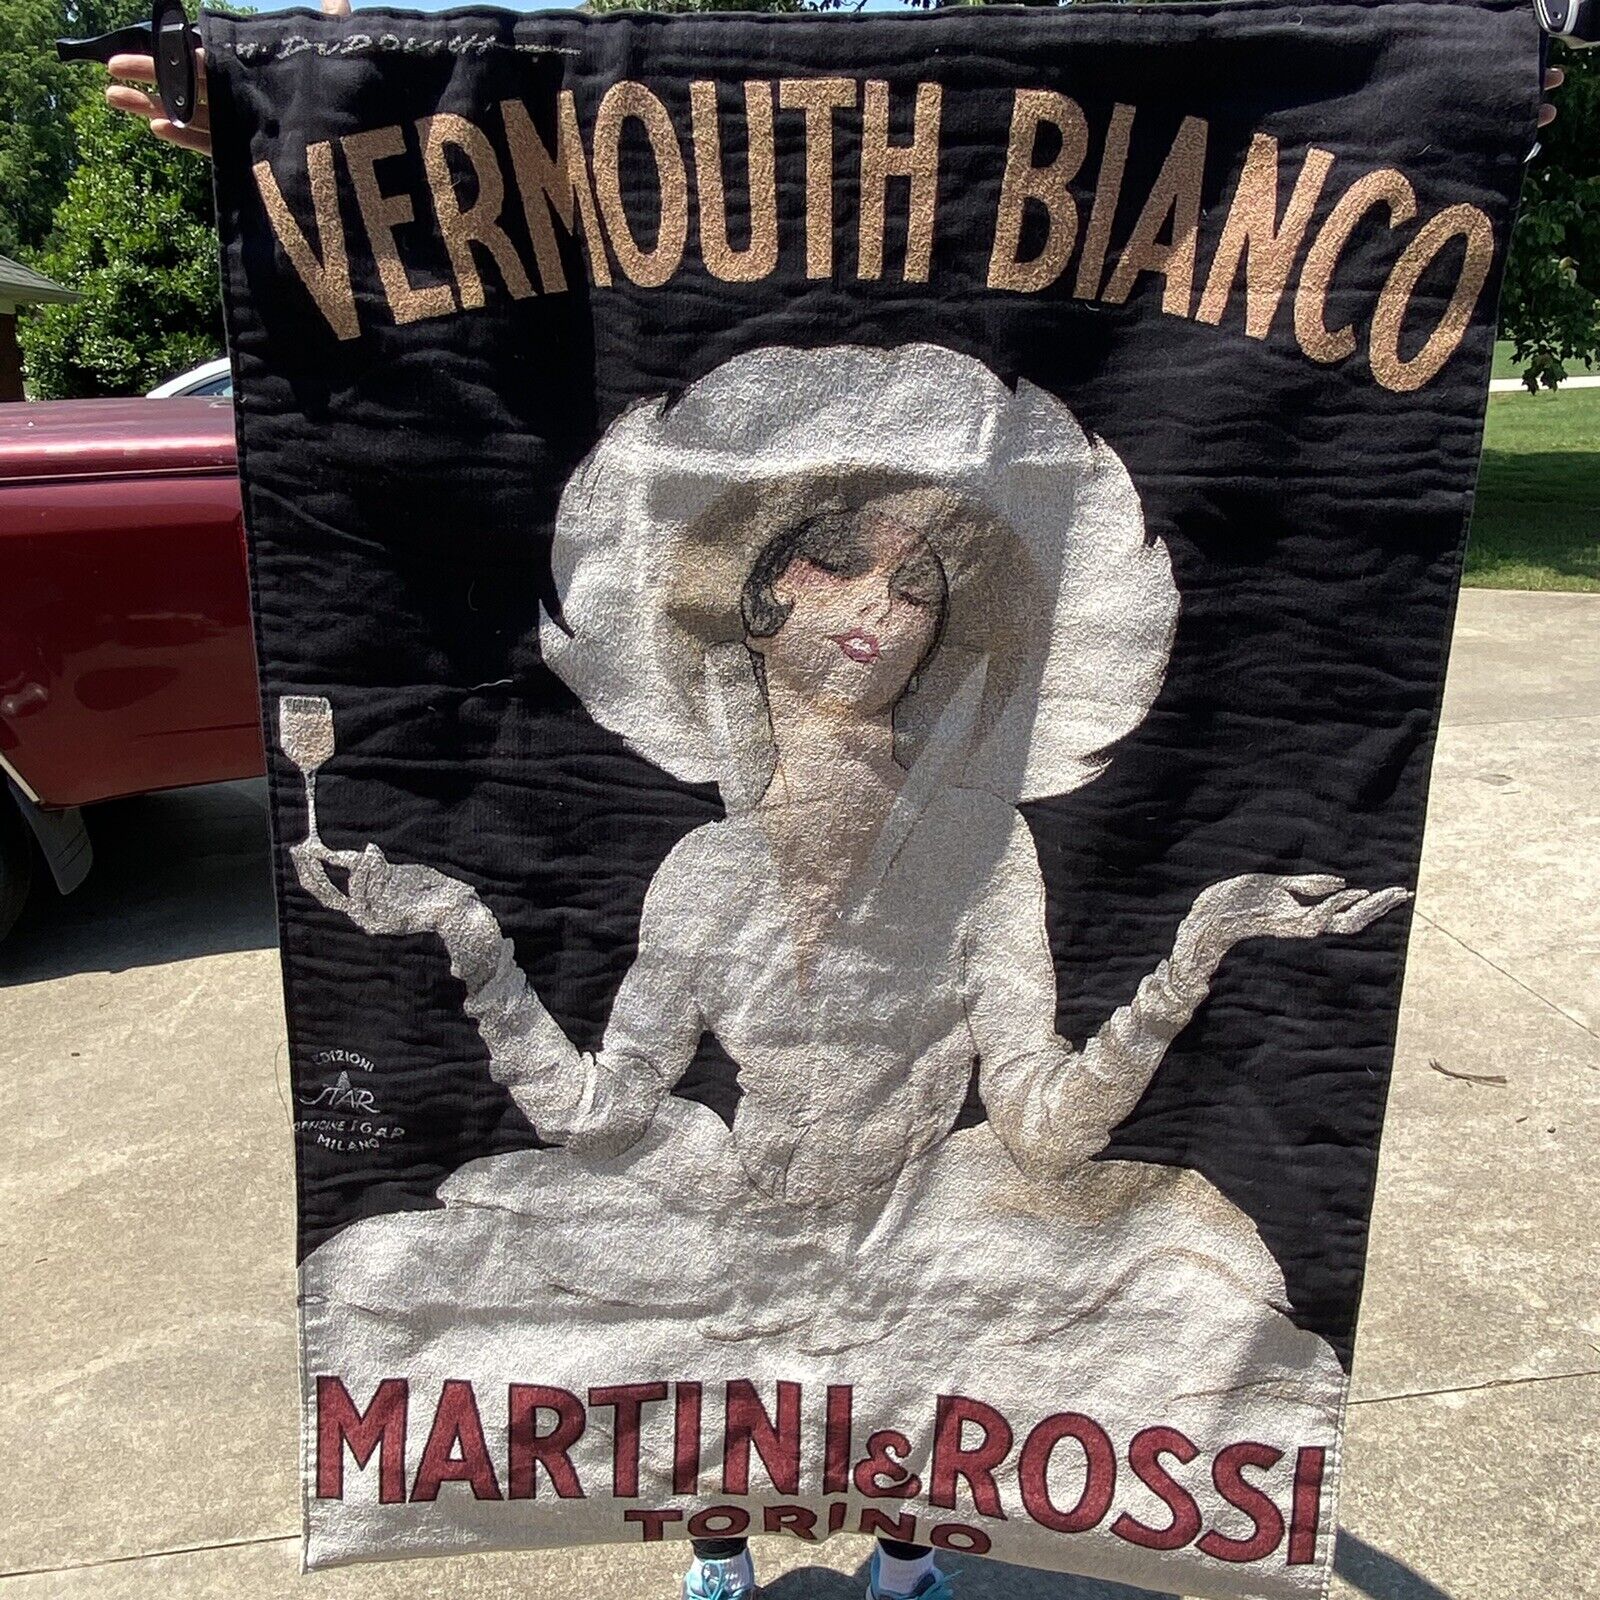 Vermouth Bianco Martini & Rossi Torino Vintage Tapestry Stitched Wall Hanging